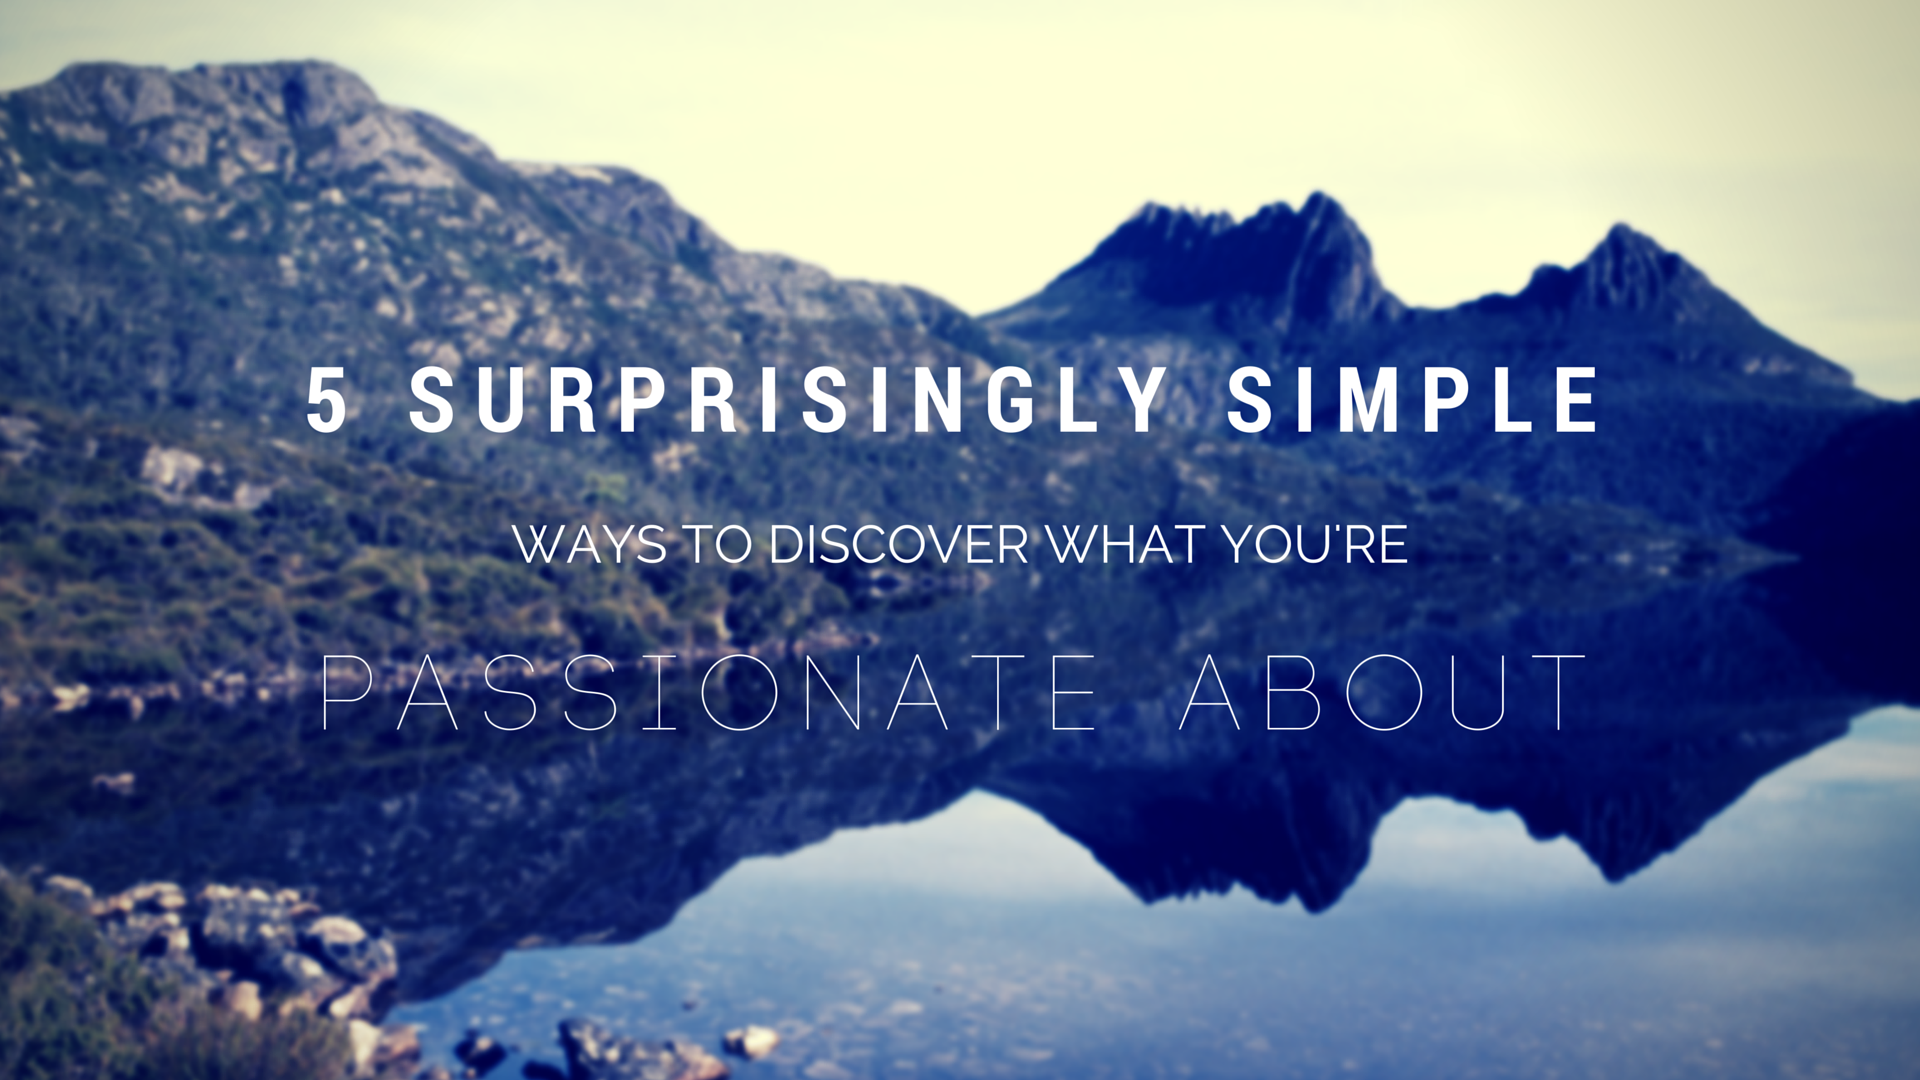 5 Surprisingly Simple Ways to Discover What You're Passionate About